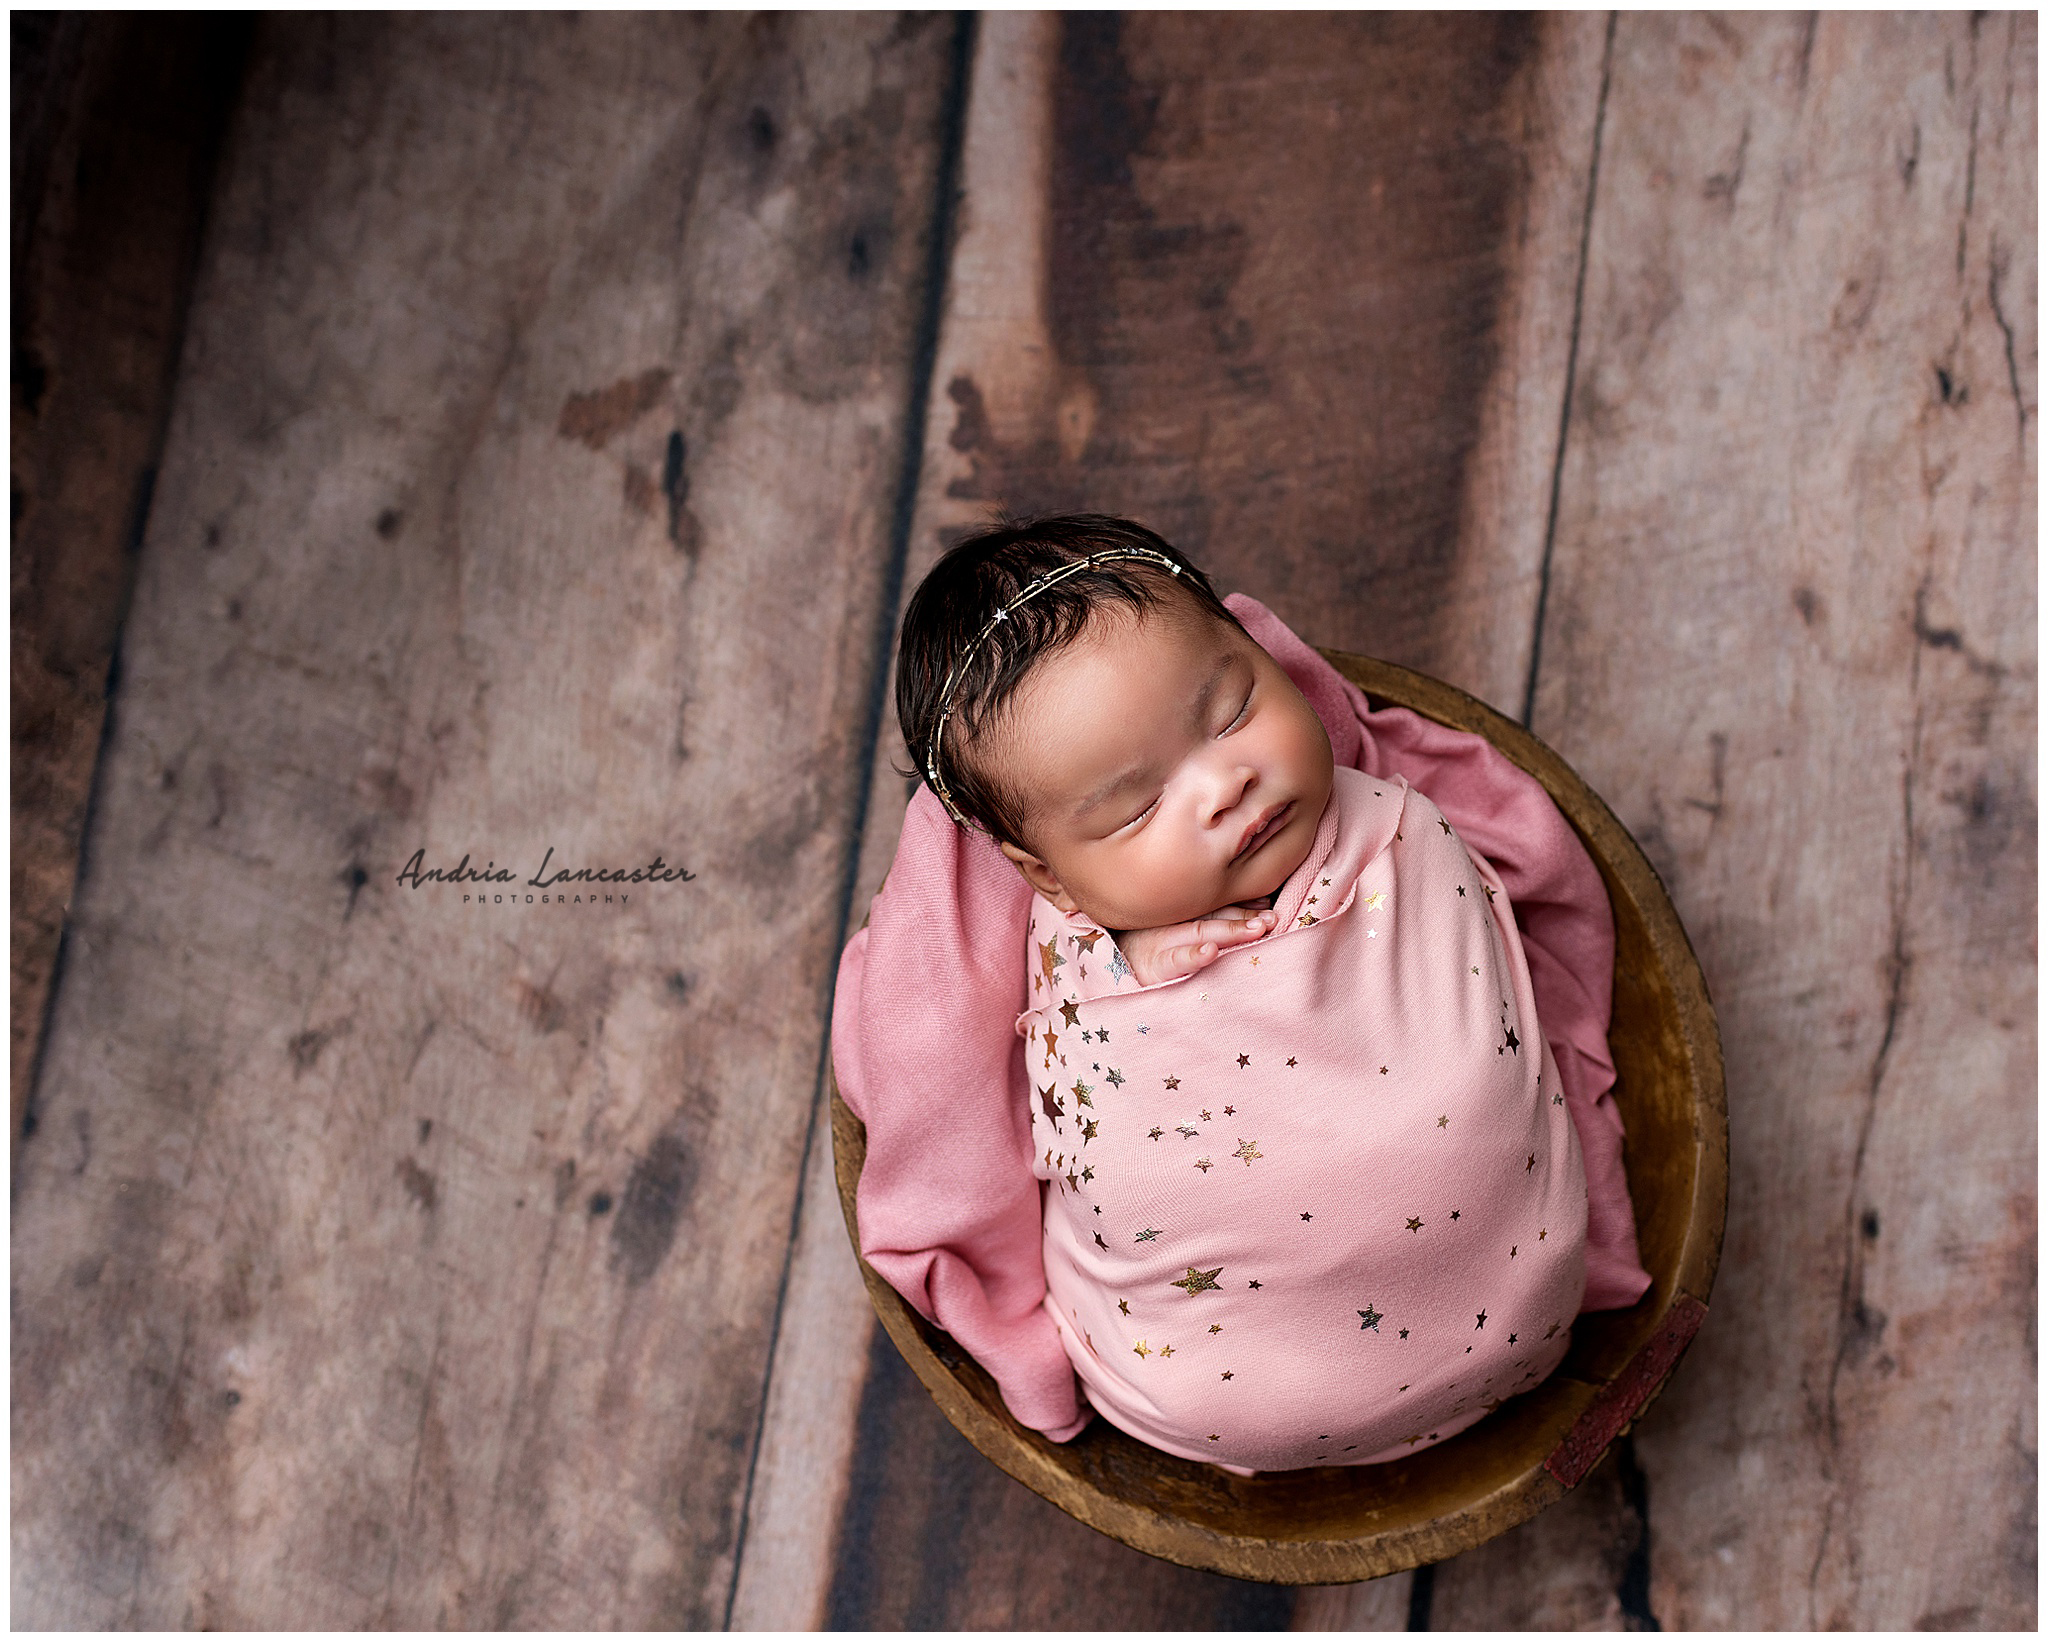 Newborn wrapped in pink with star headband in a bowl